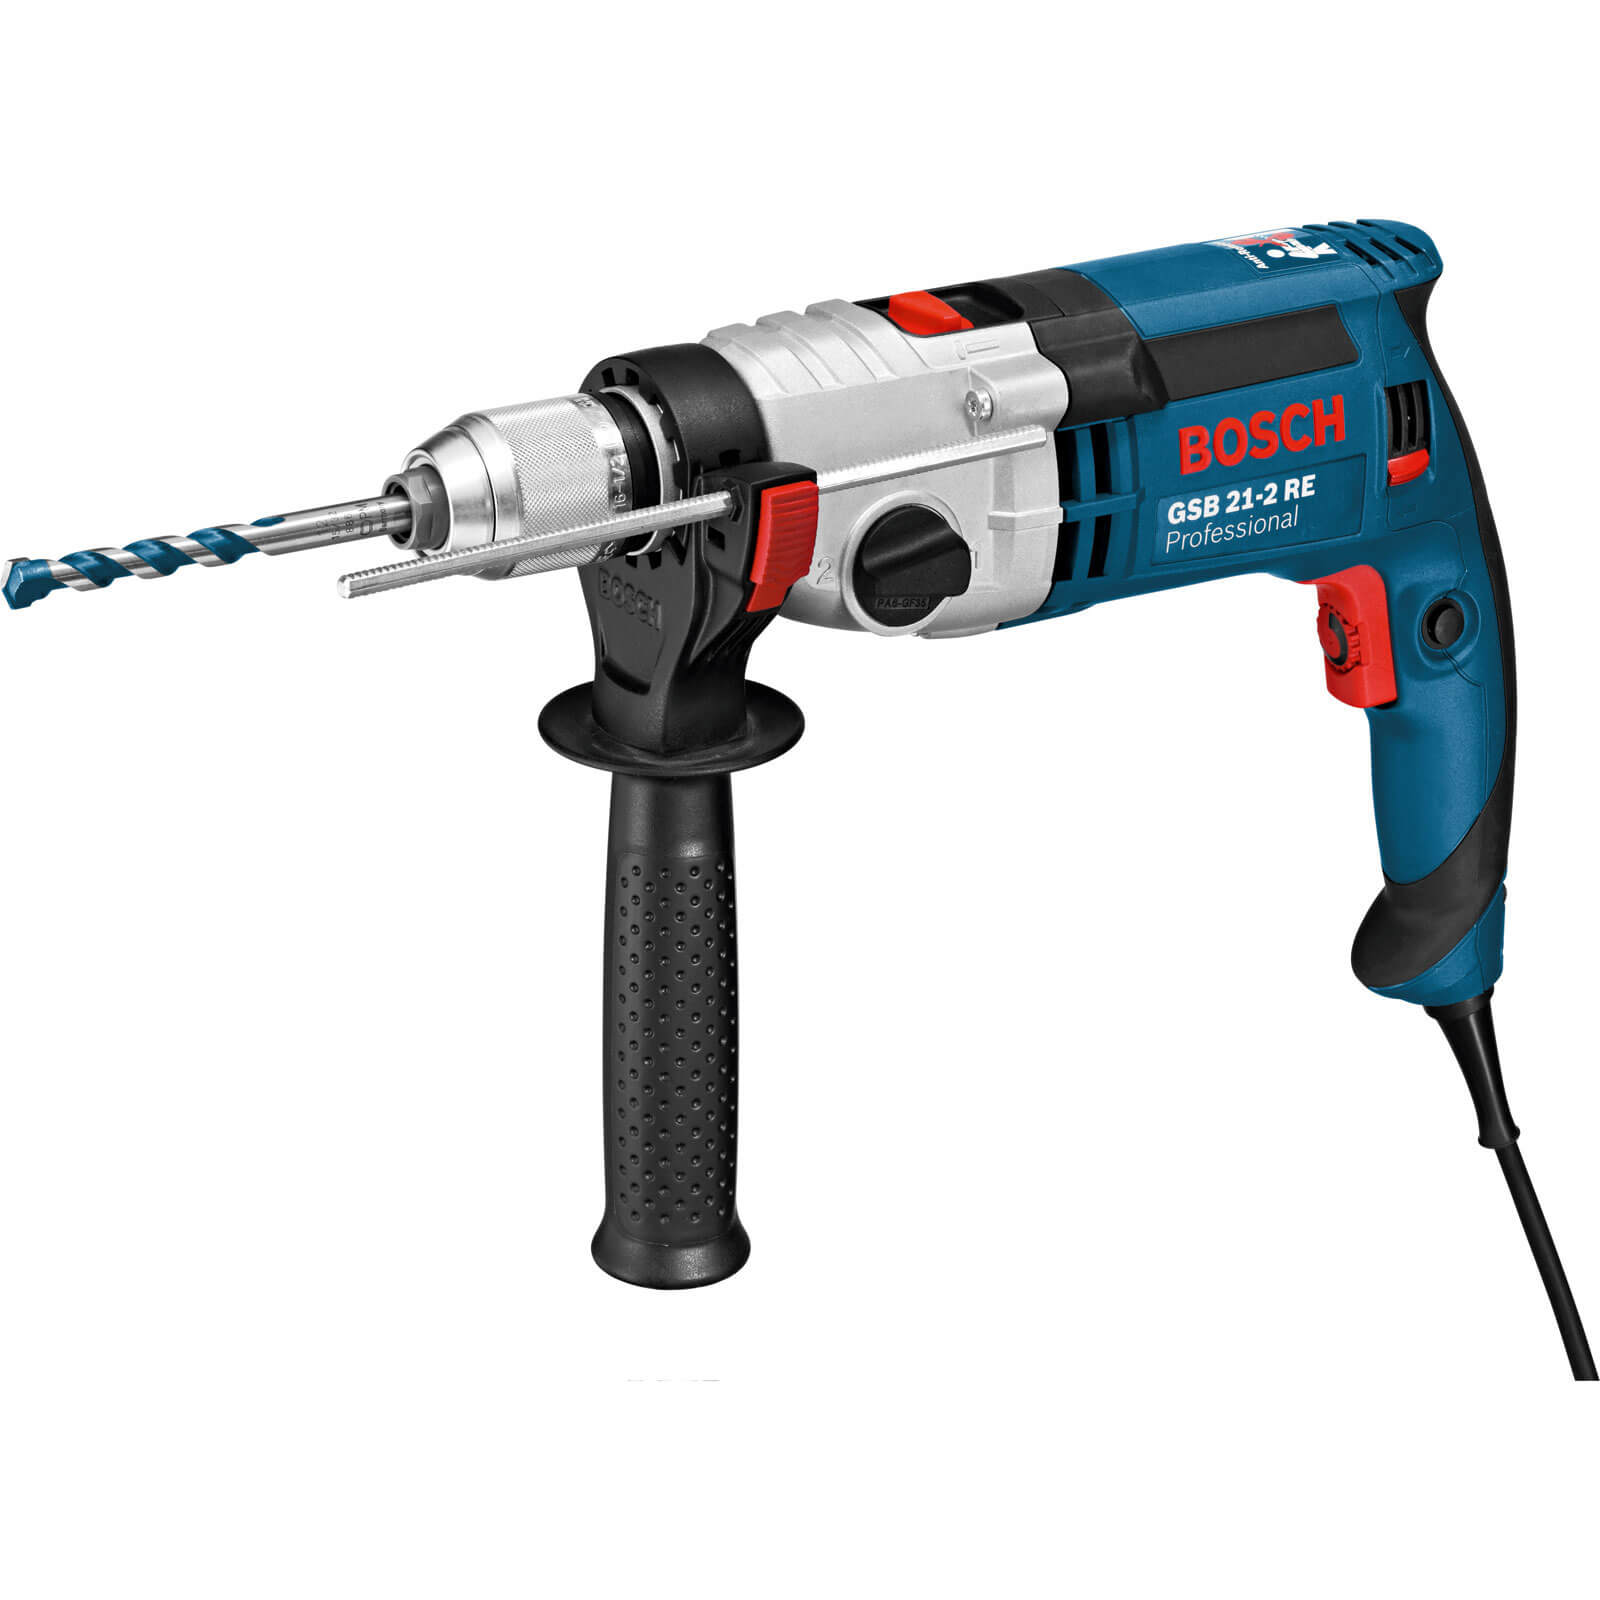 Bosch GSB 21-2RE Hammer Drill with Variable Speed 1100w 240v